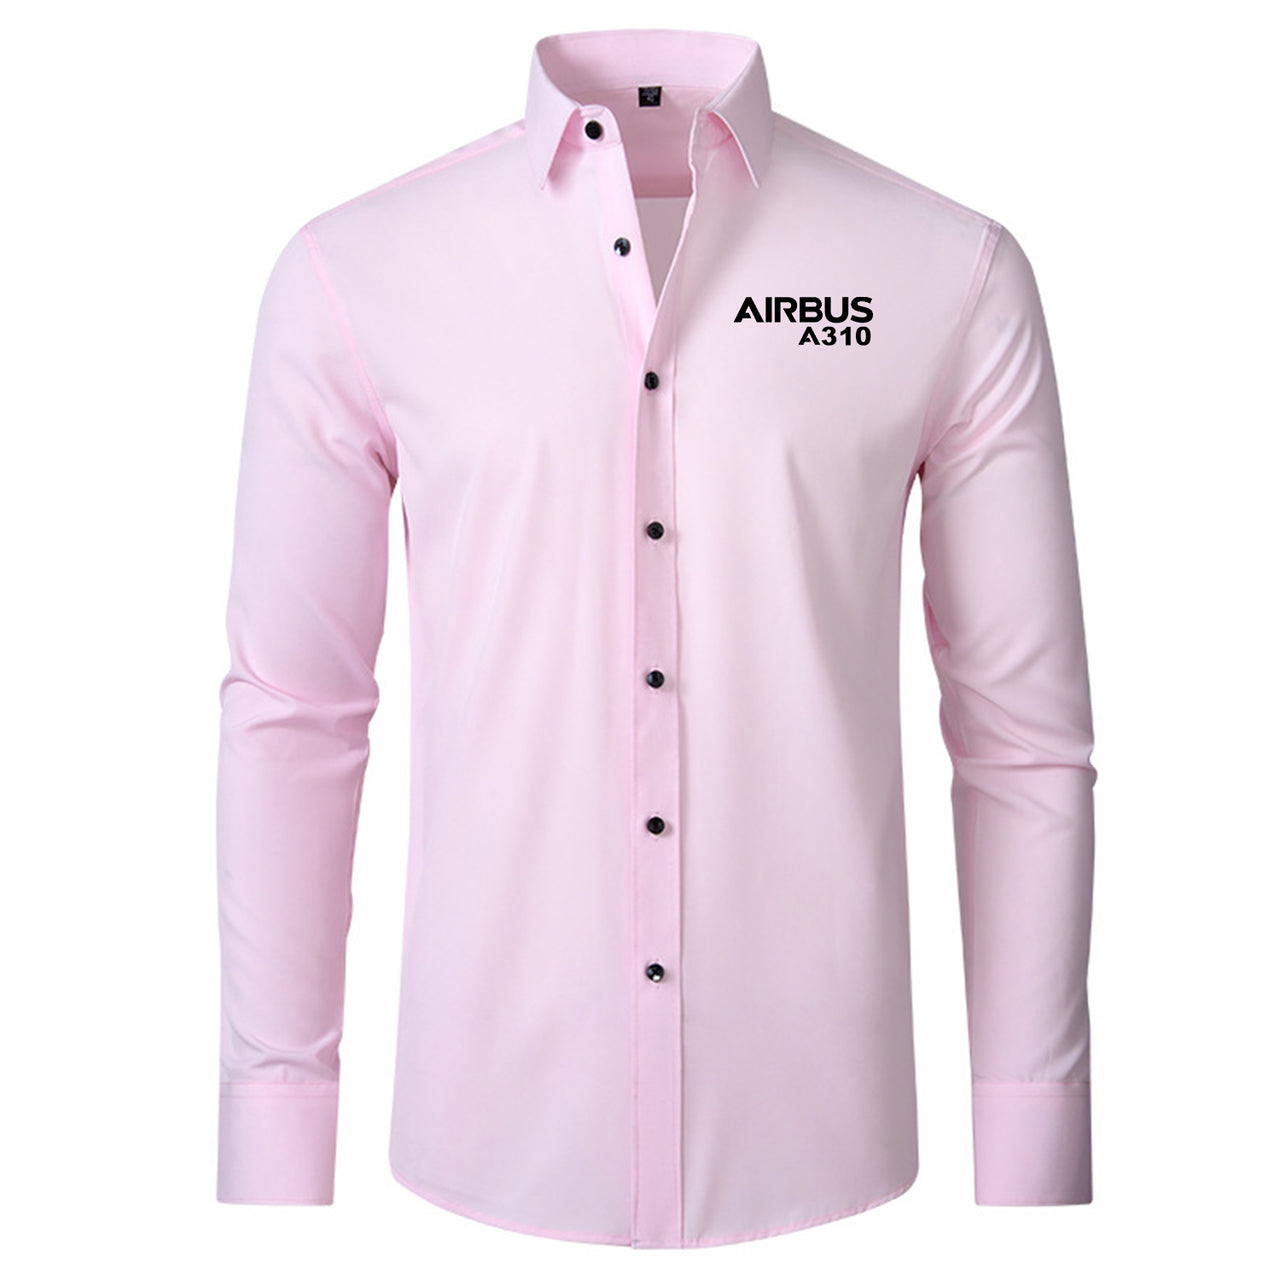 Airbus A310 & Text Designed Long Sleeve Shirts